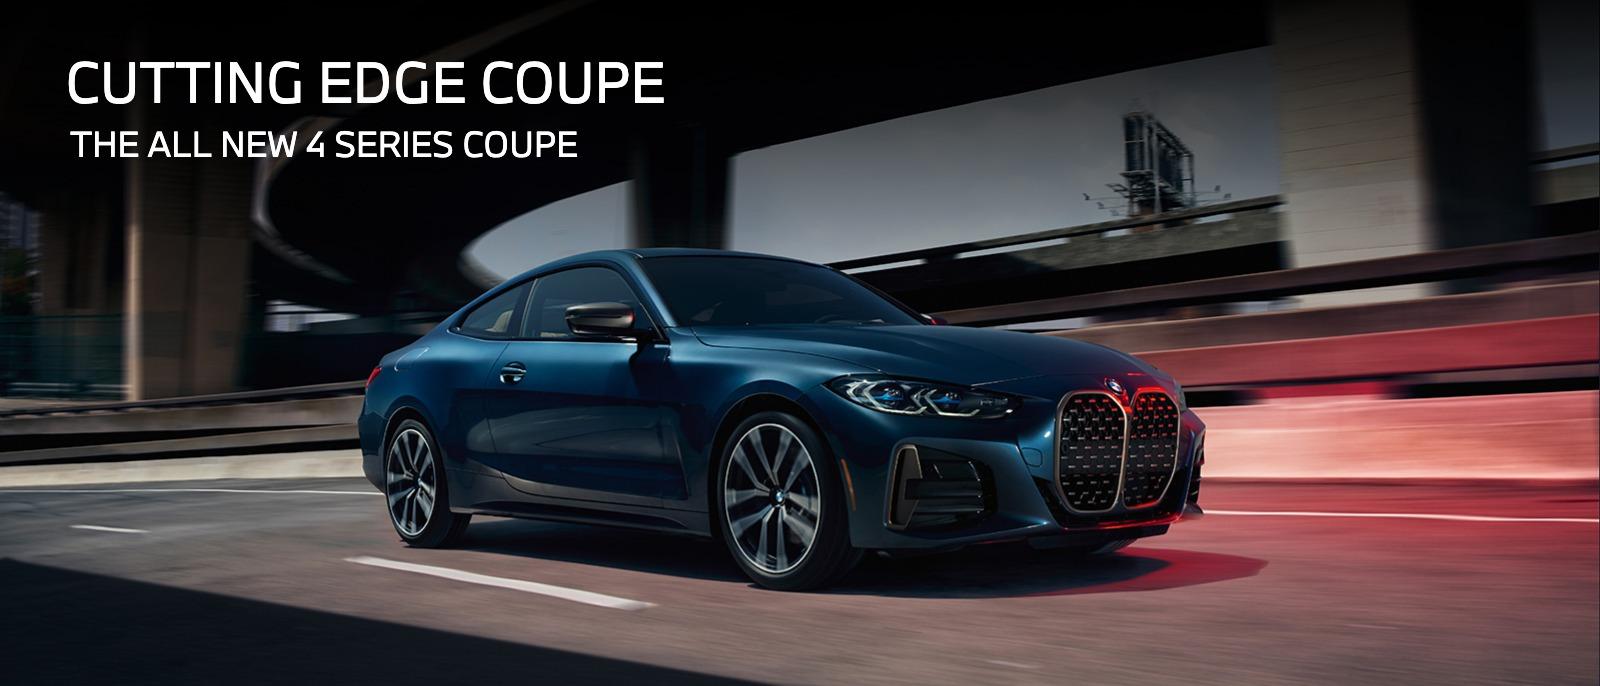 A Cutting Edge Coupe | The all new 4 Series Coupe